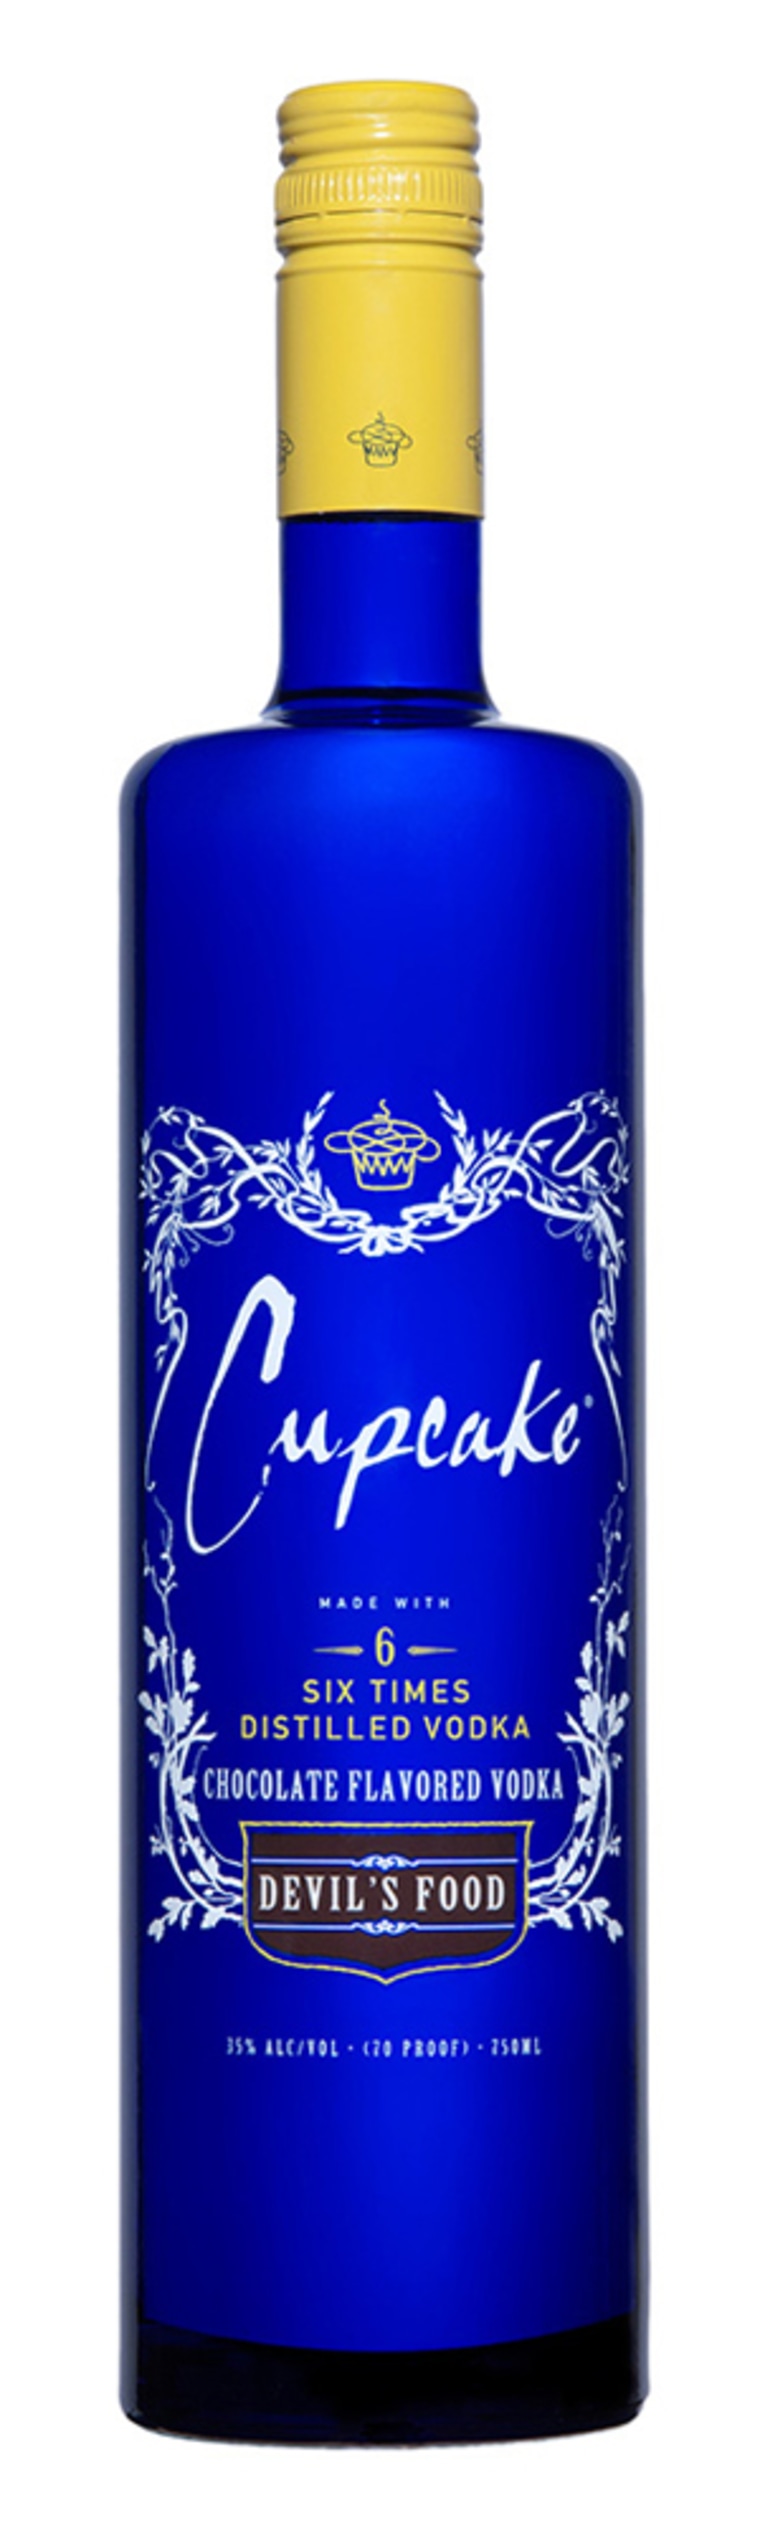 Cupcake Vodka promises your drink will taste exactly as it sounds.